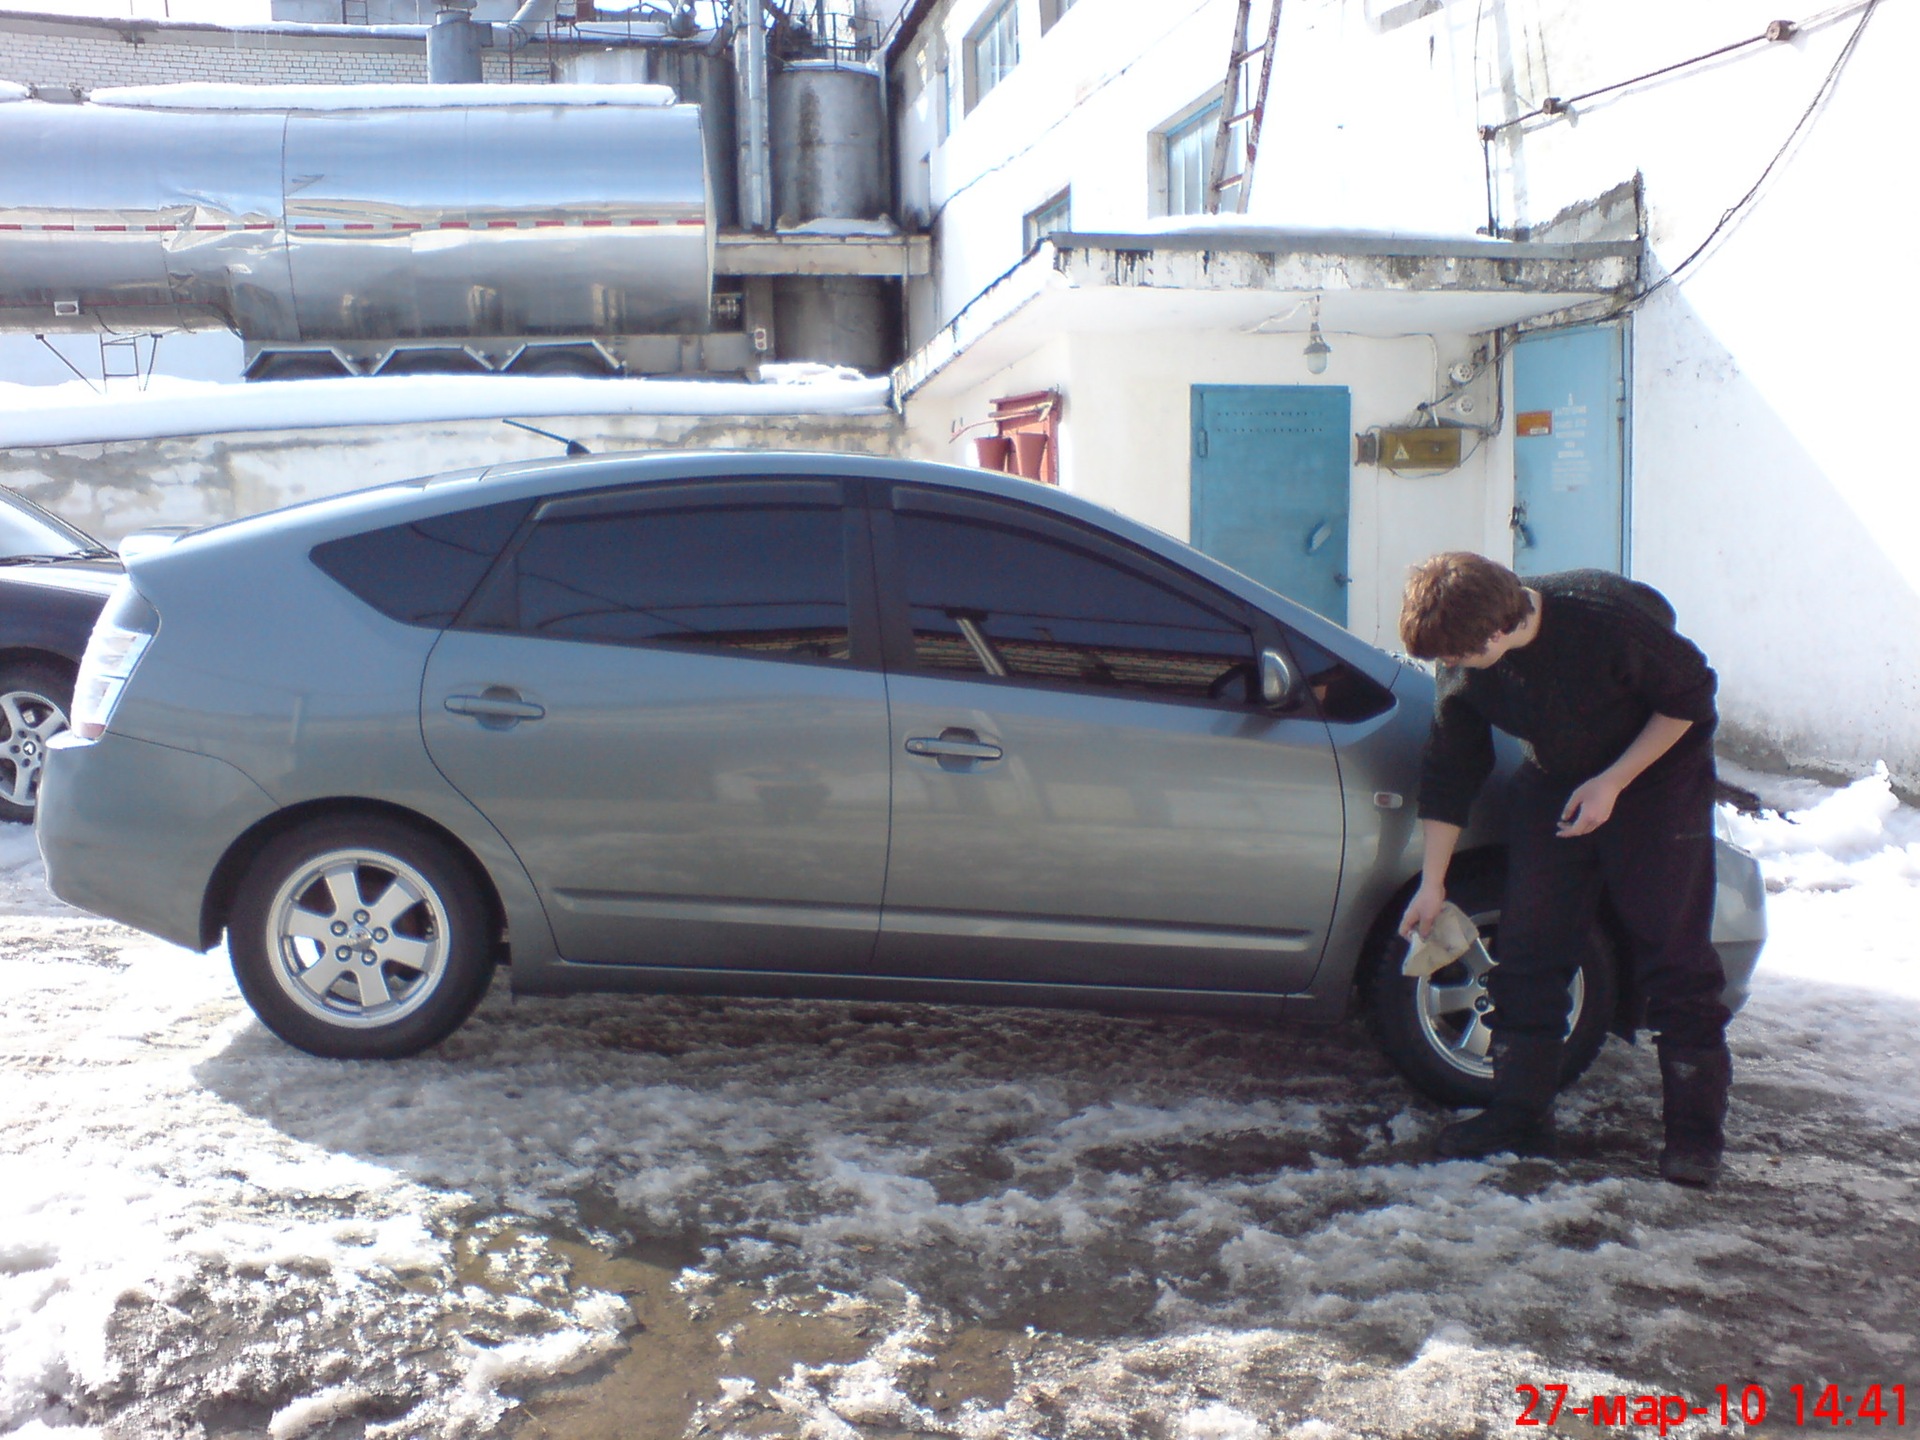 Washed cleaned changed  - Toyota Prius 15 L 2005